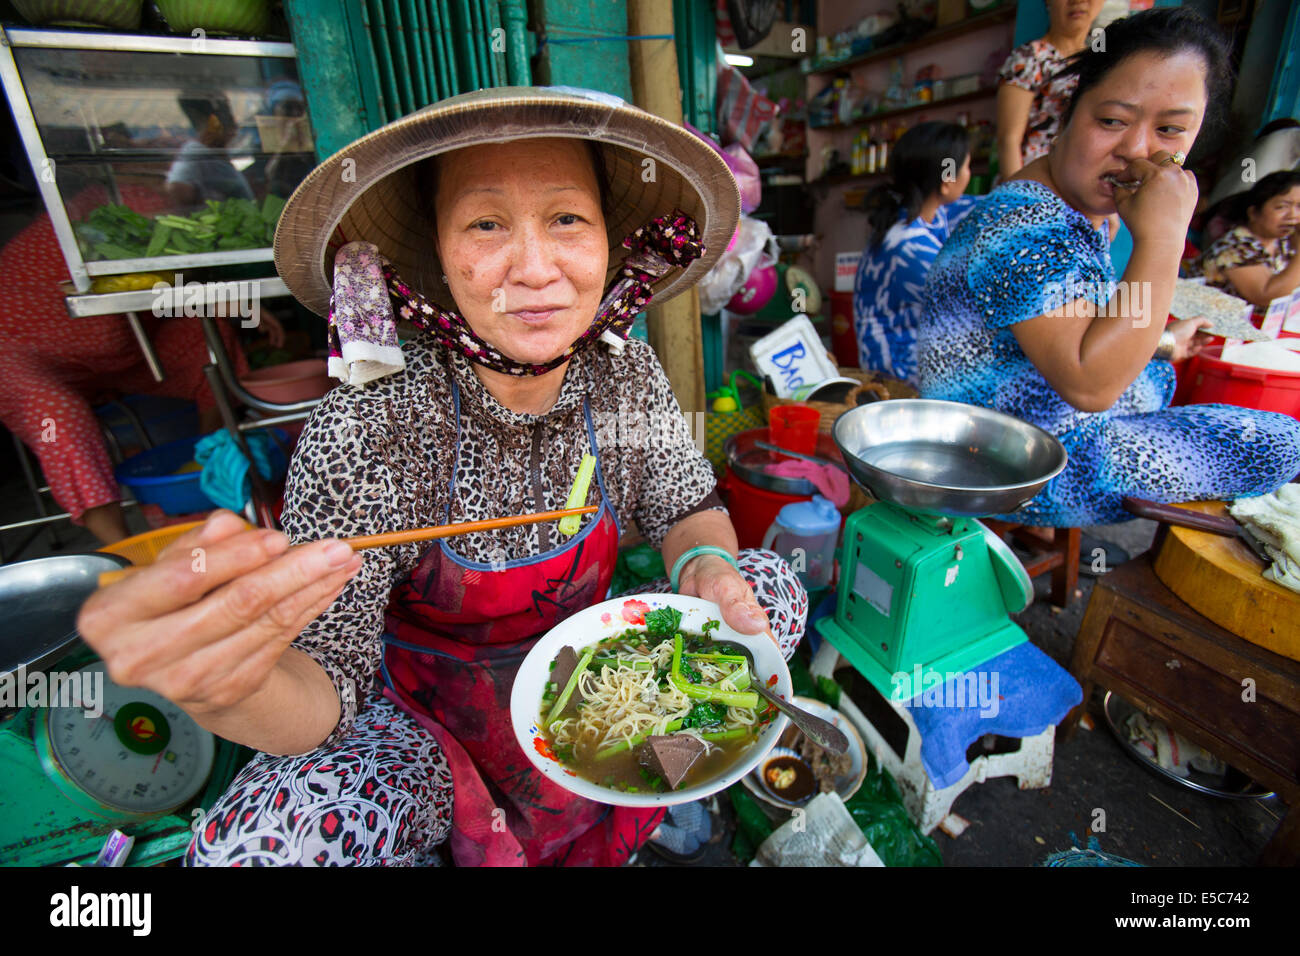 Vietnamese woman at market in 'non la' hat eating pho with chopsticks Stock Photo